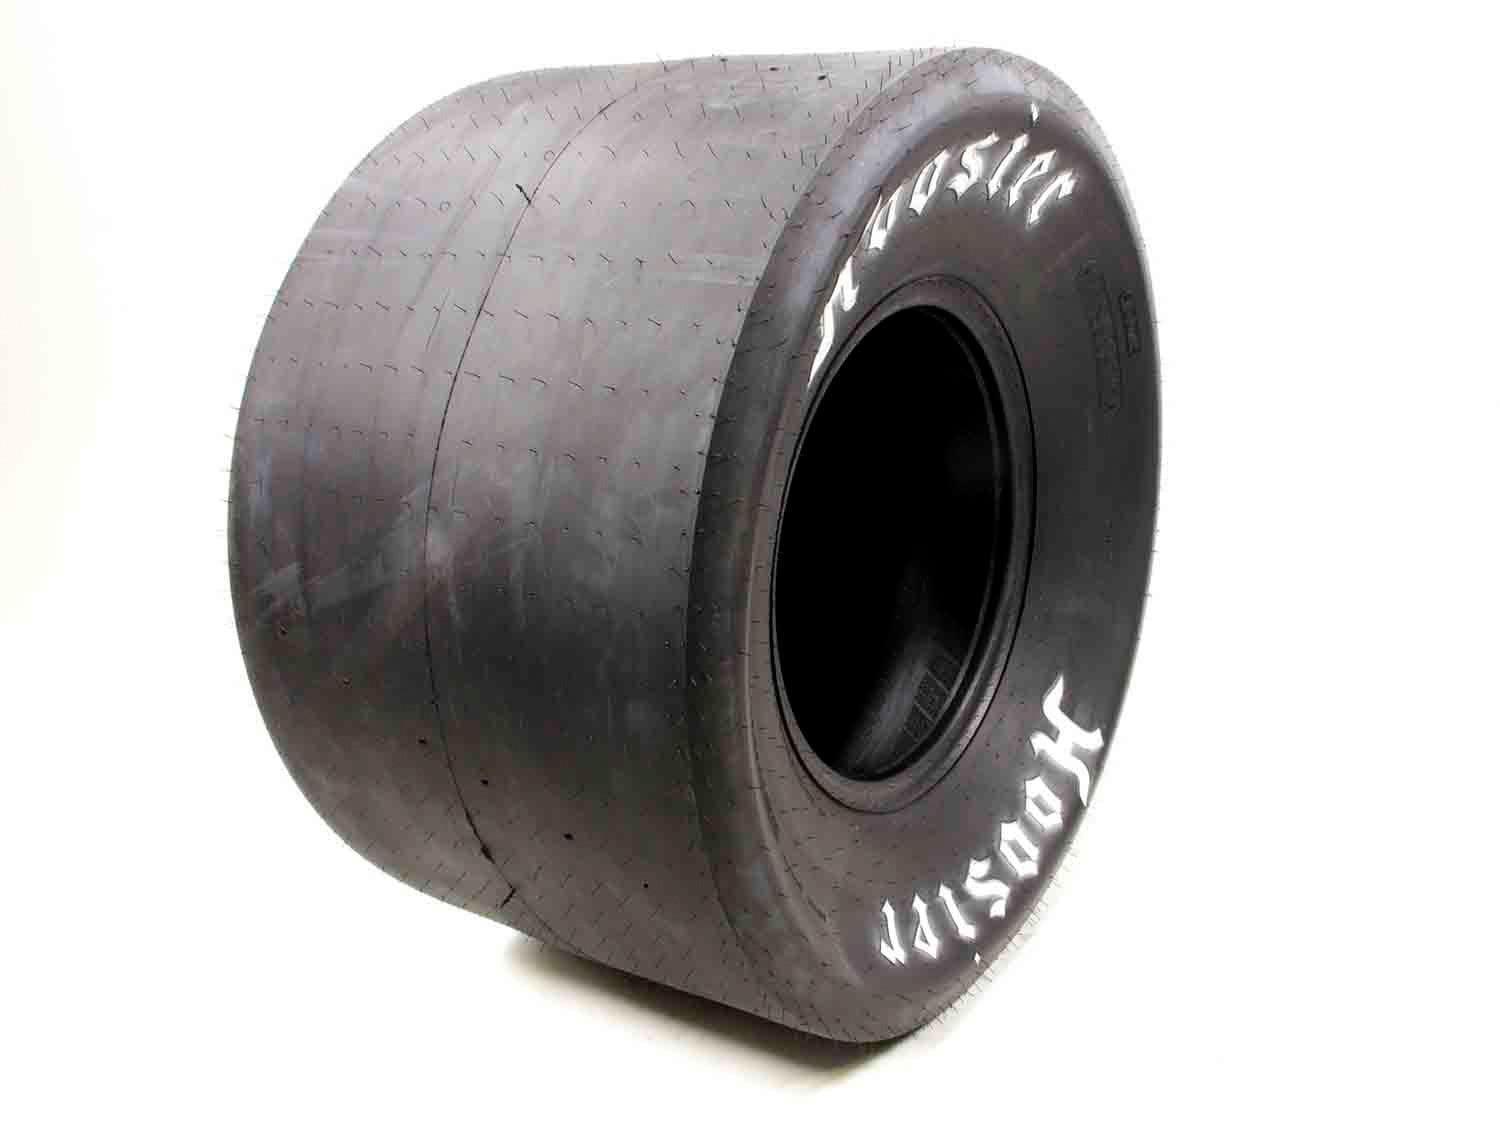 Drag Tire 17.0/34.5-16 N2021 Compound - Burlile Performance Products